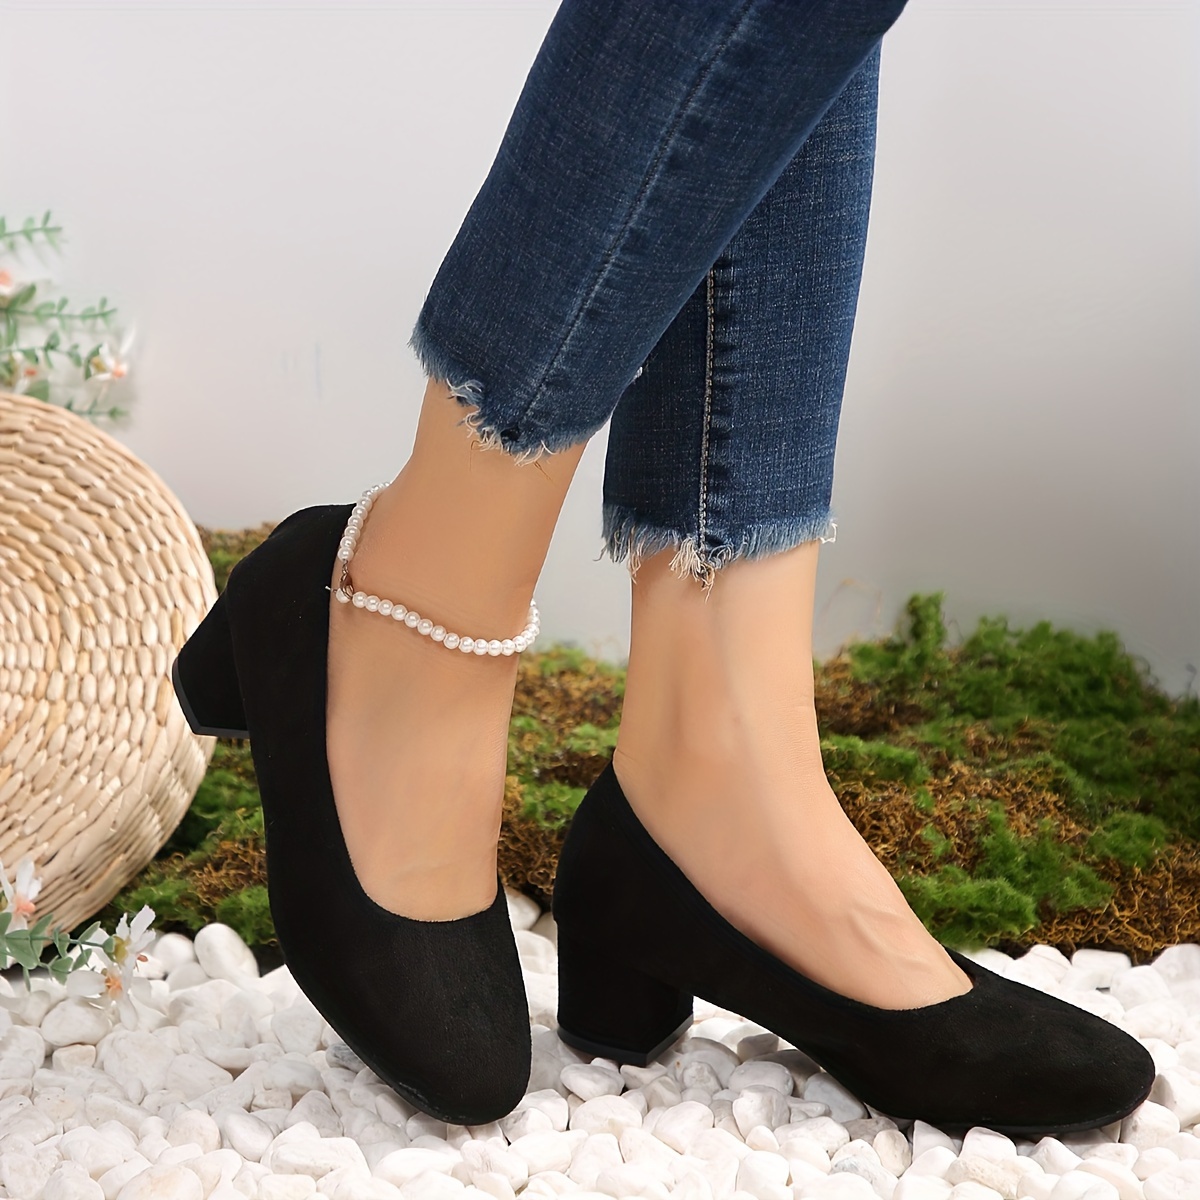 CHGBMOK Clearance Heels for Women Style Shallow Mouth Modern Dance